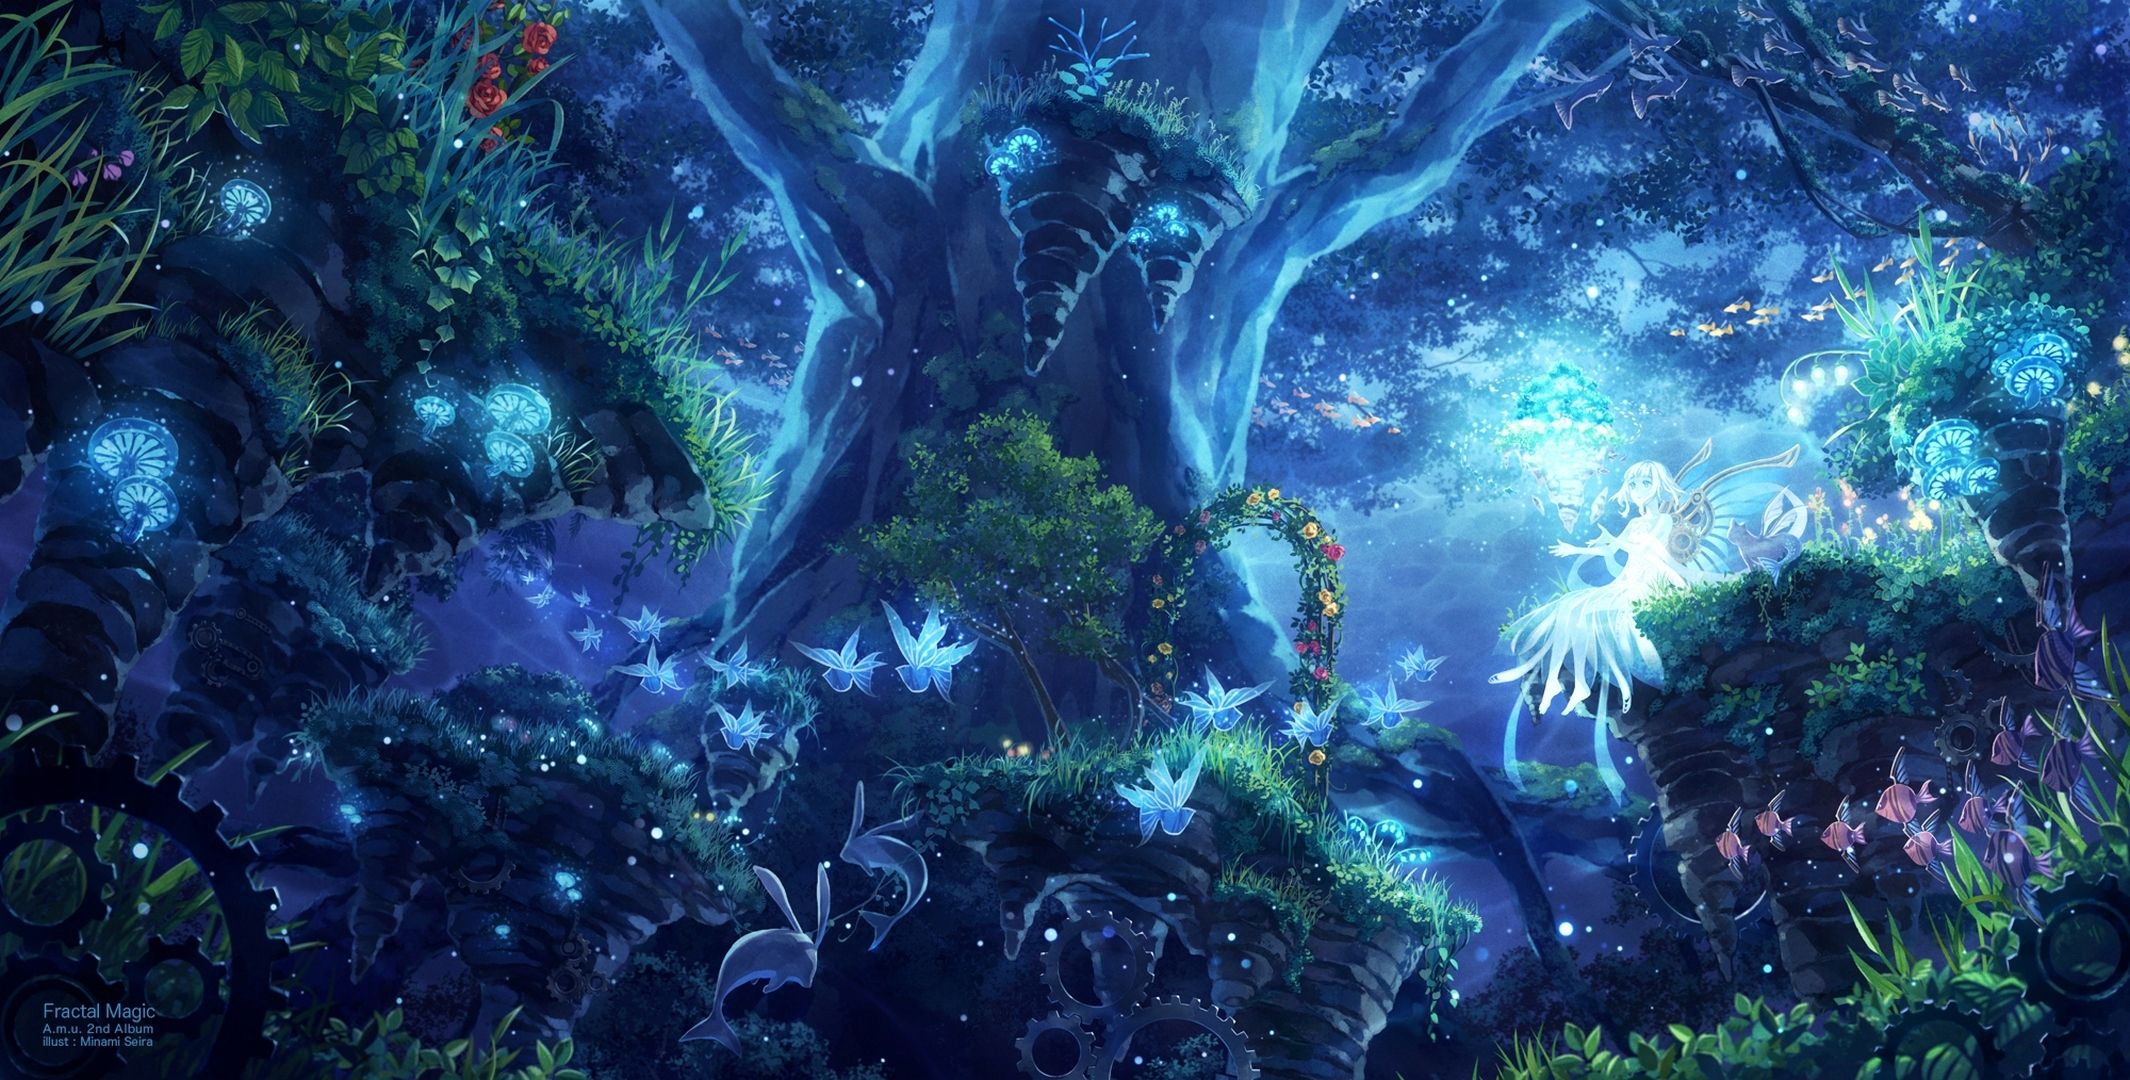 Anime Scenery Wallpaper Forests And Castles Art